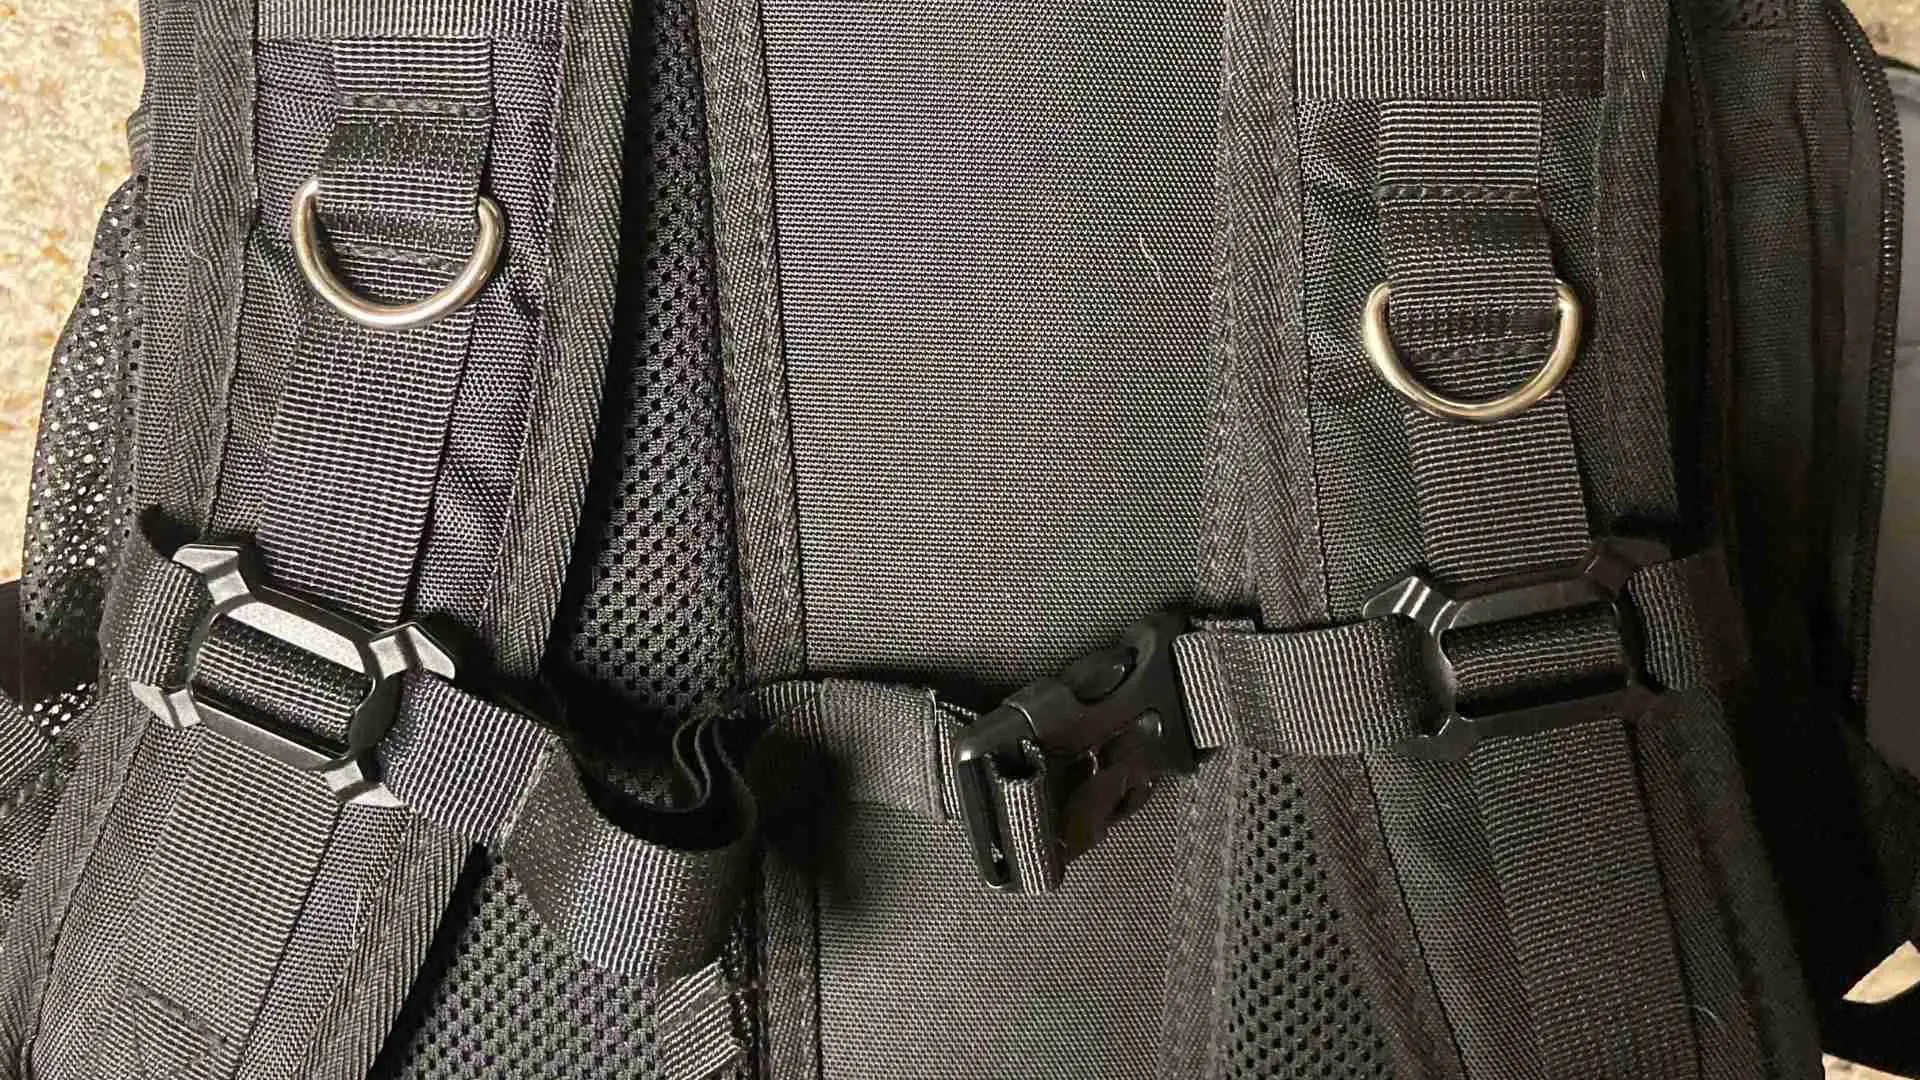 What are d rings used for on backpacks?